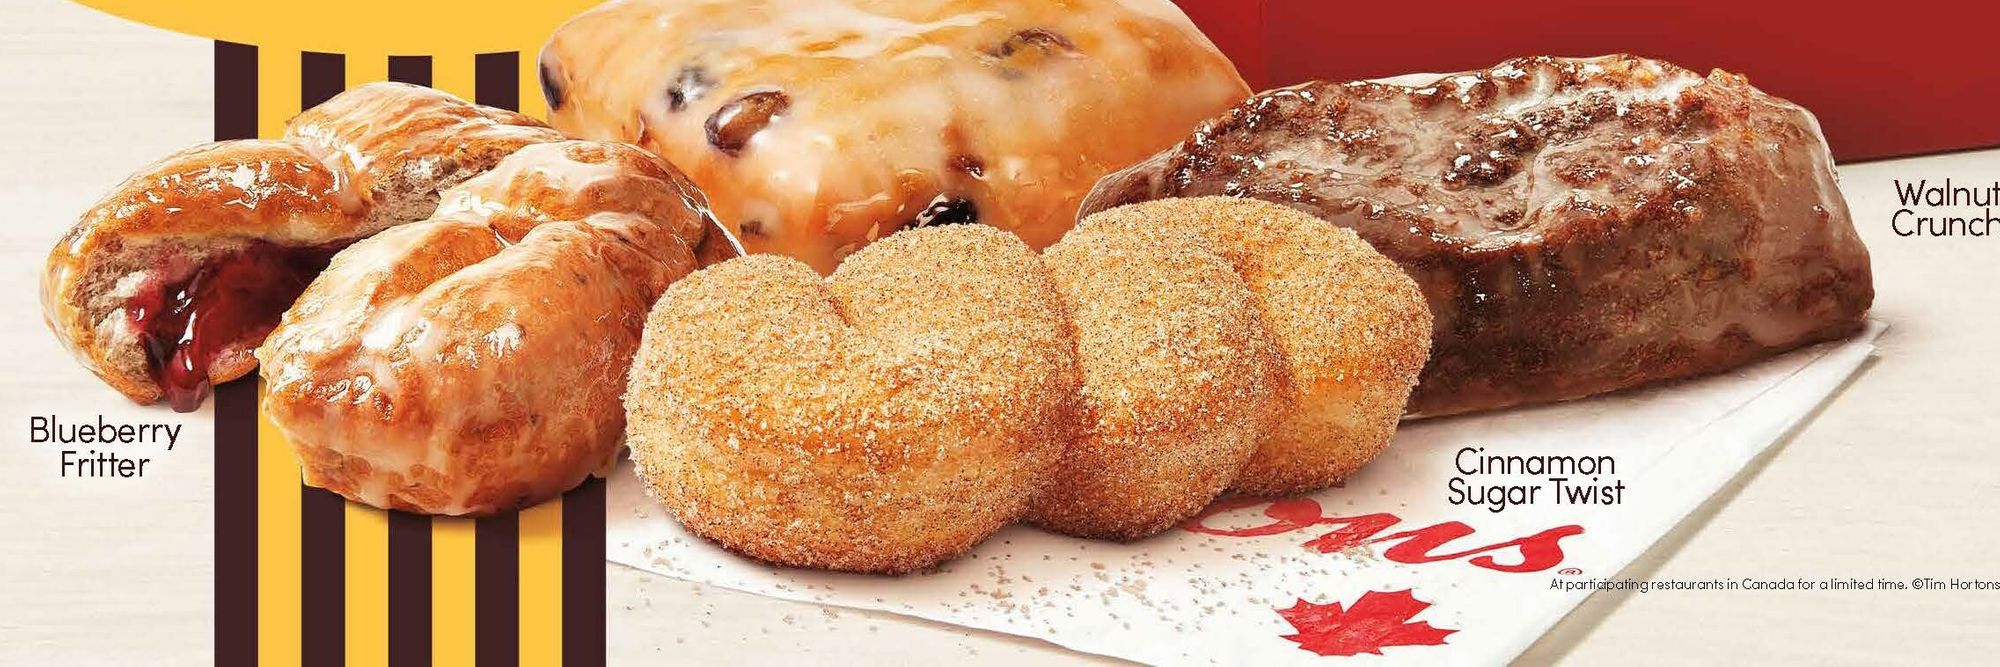 Tim Hortons is turning 60! Get ready to join Tims for a year of